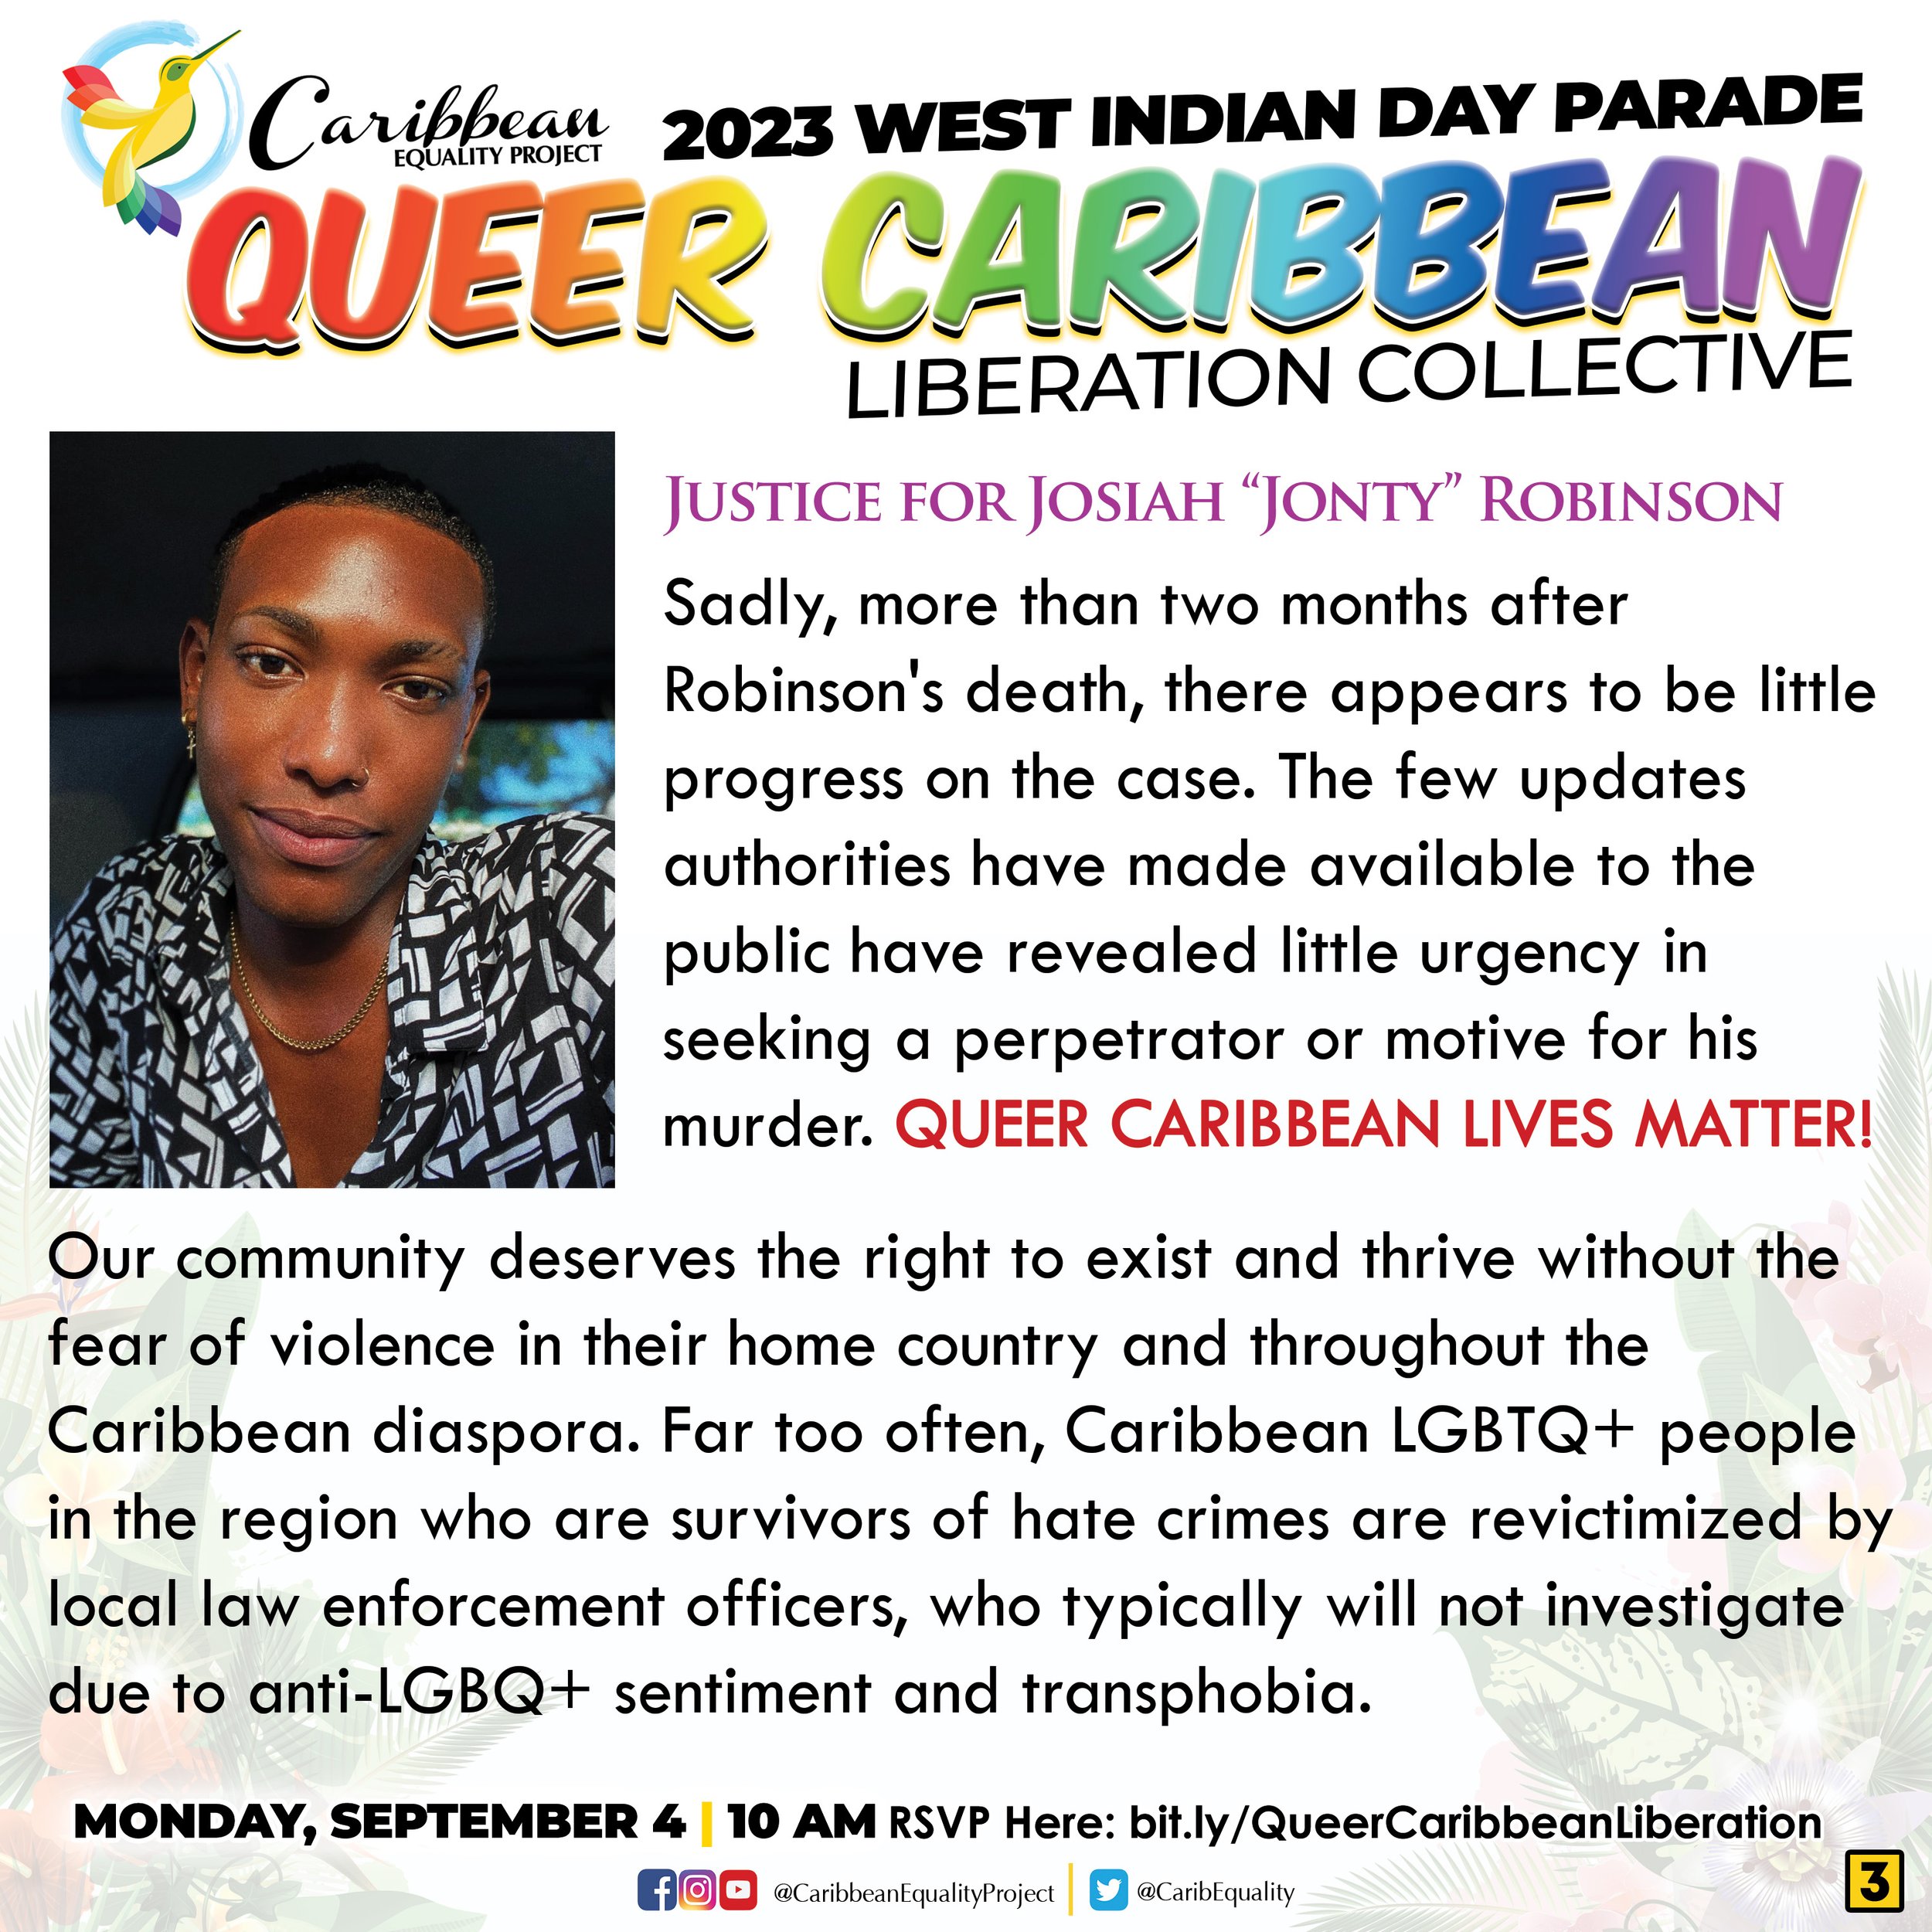 2023 Queer Caribbean Collective_Justice for Jonty 3.jpg